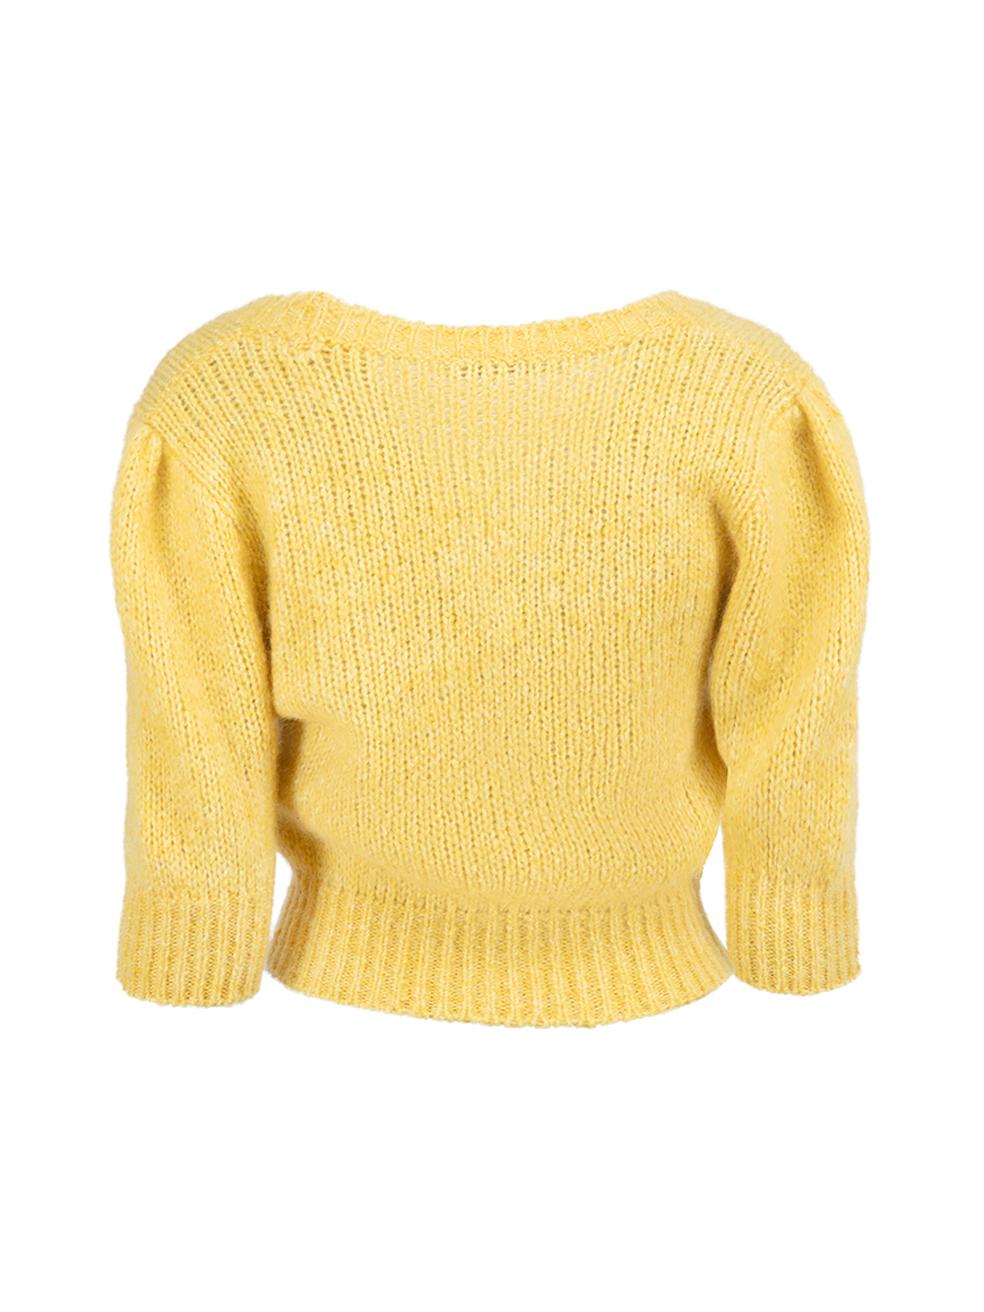 Alessandra Rich Yellow Alpaca Floral Knit Top Size M In Excellent Condition In London, GB